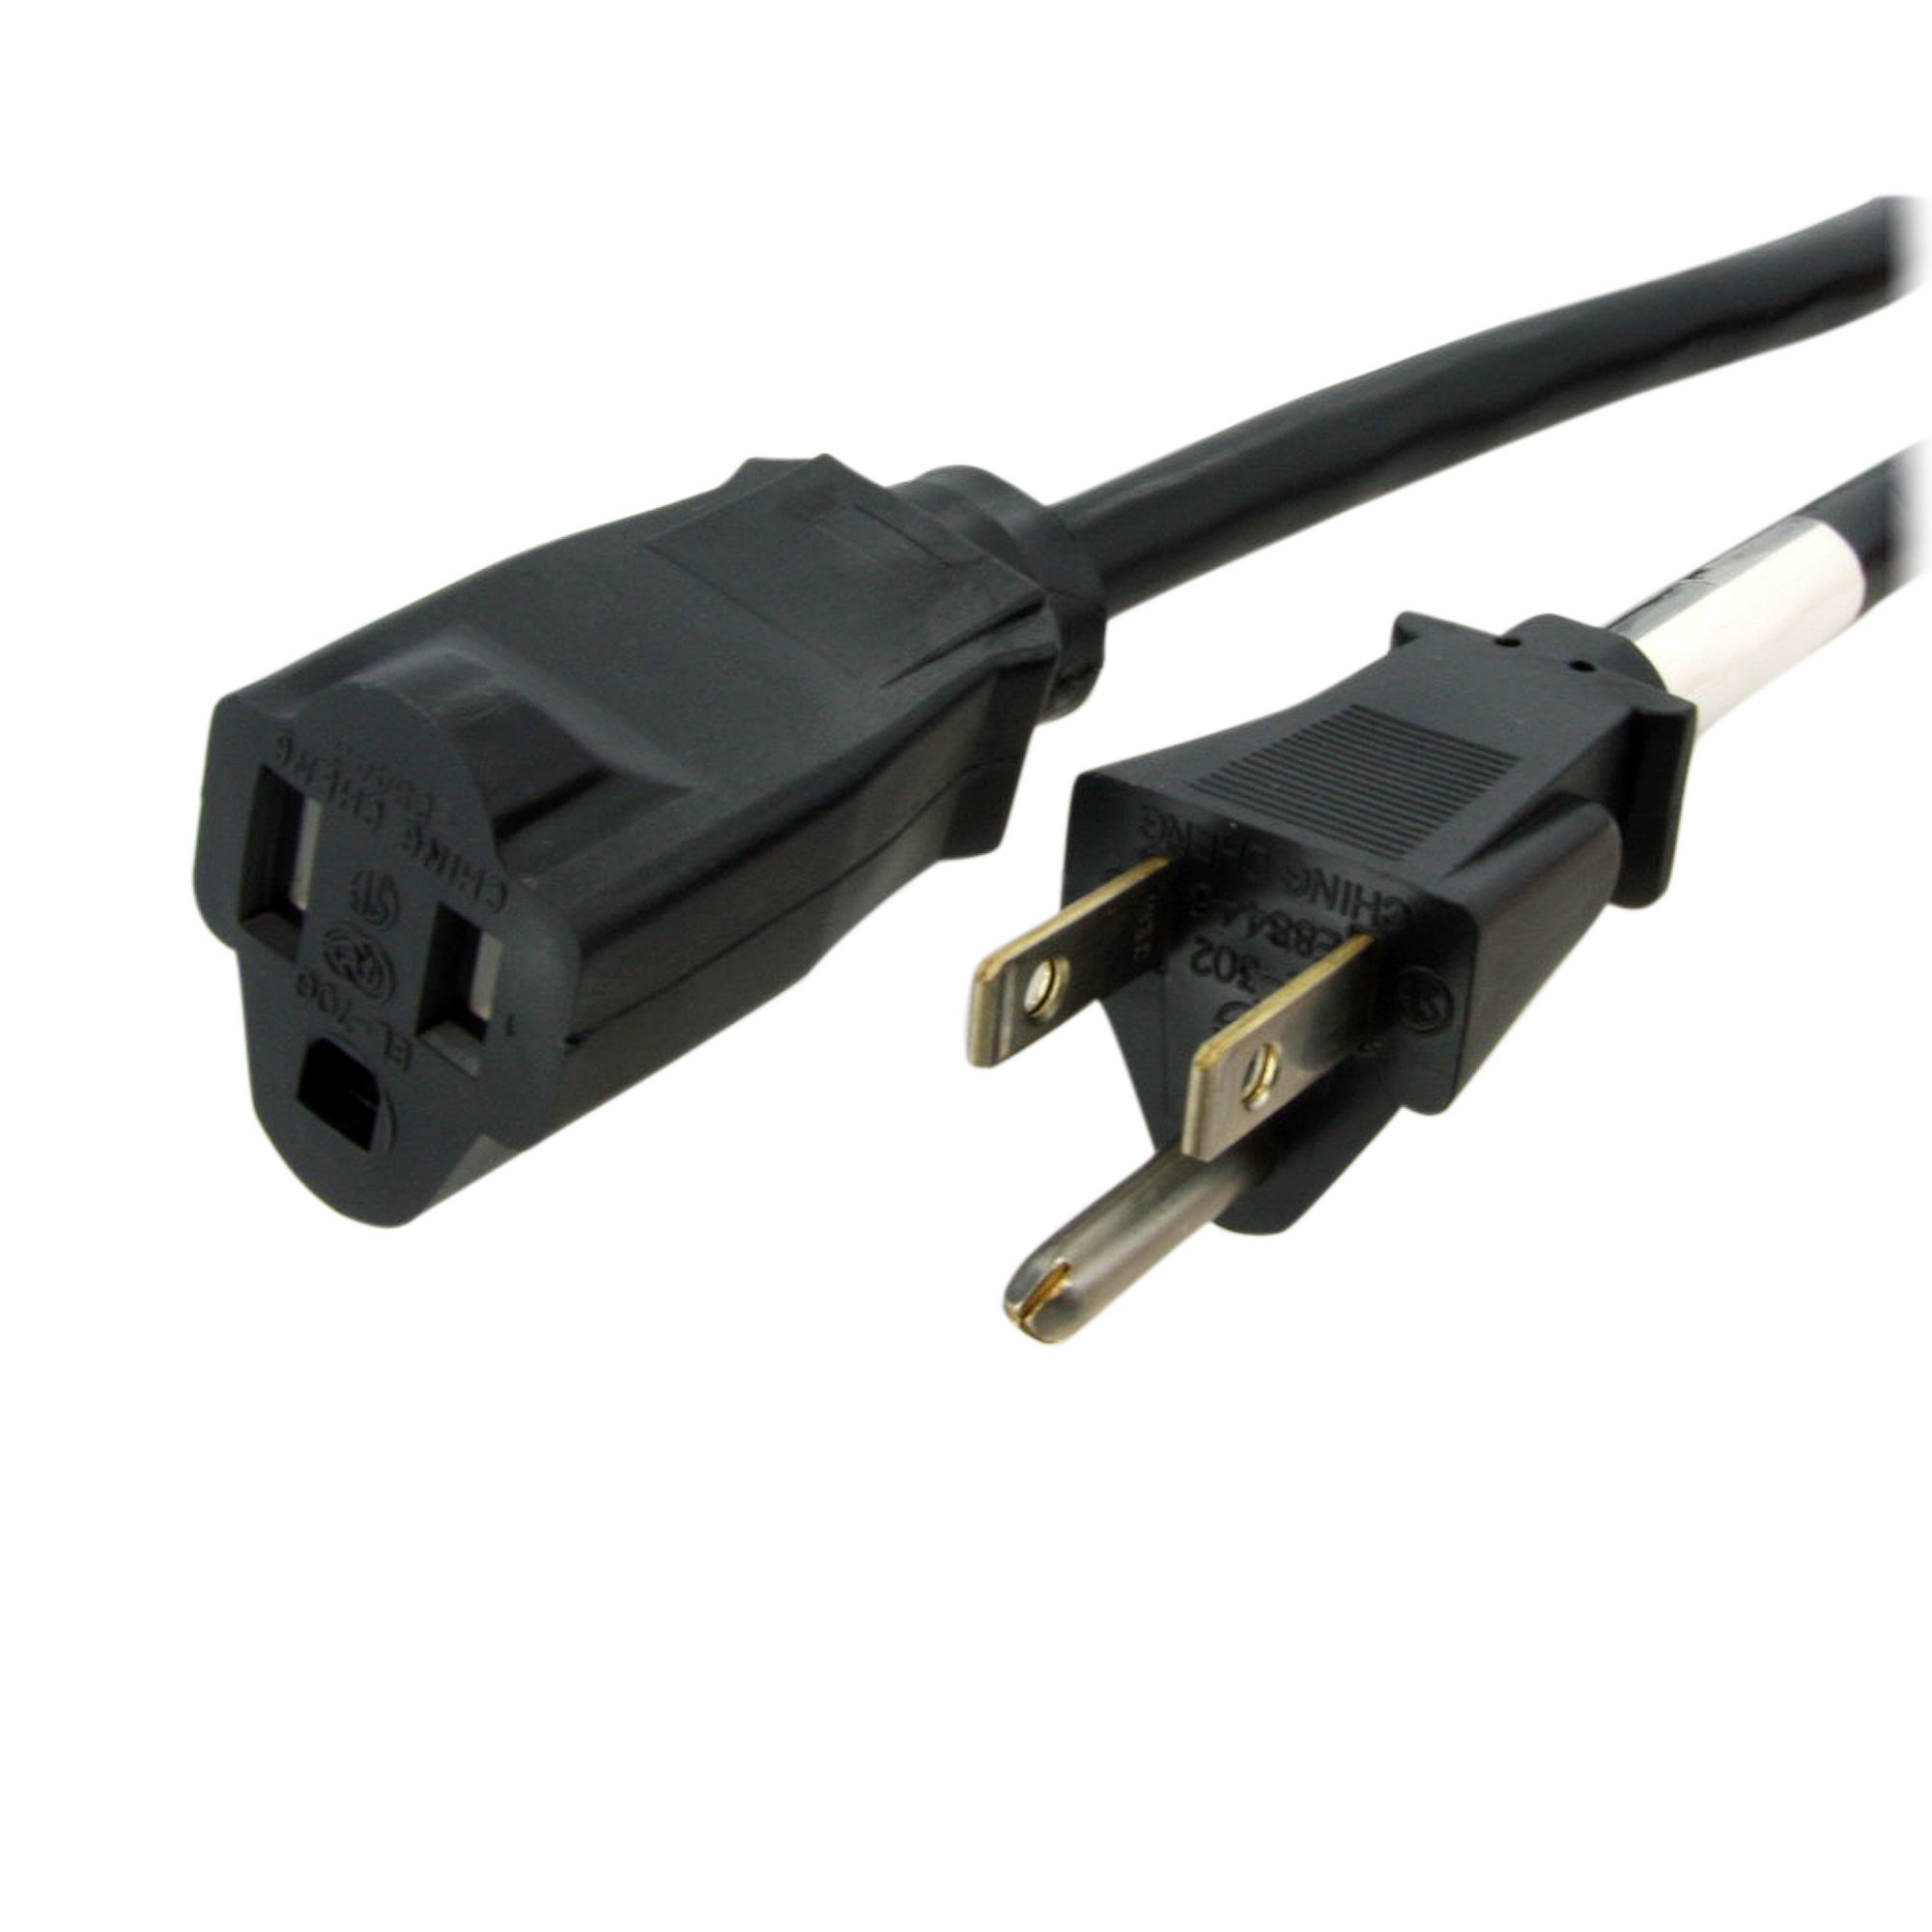 Power Extension Cord Y Splitter Cable with 3 outlets  3-prong US standard 10 AMP 